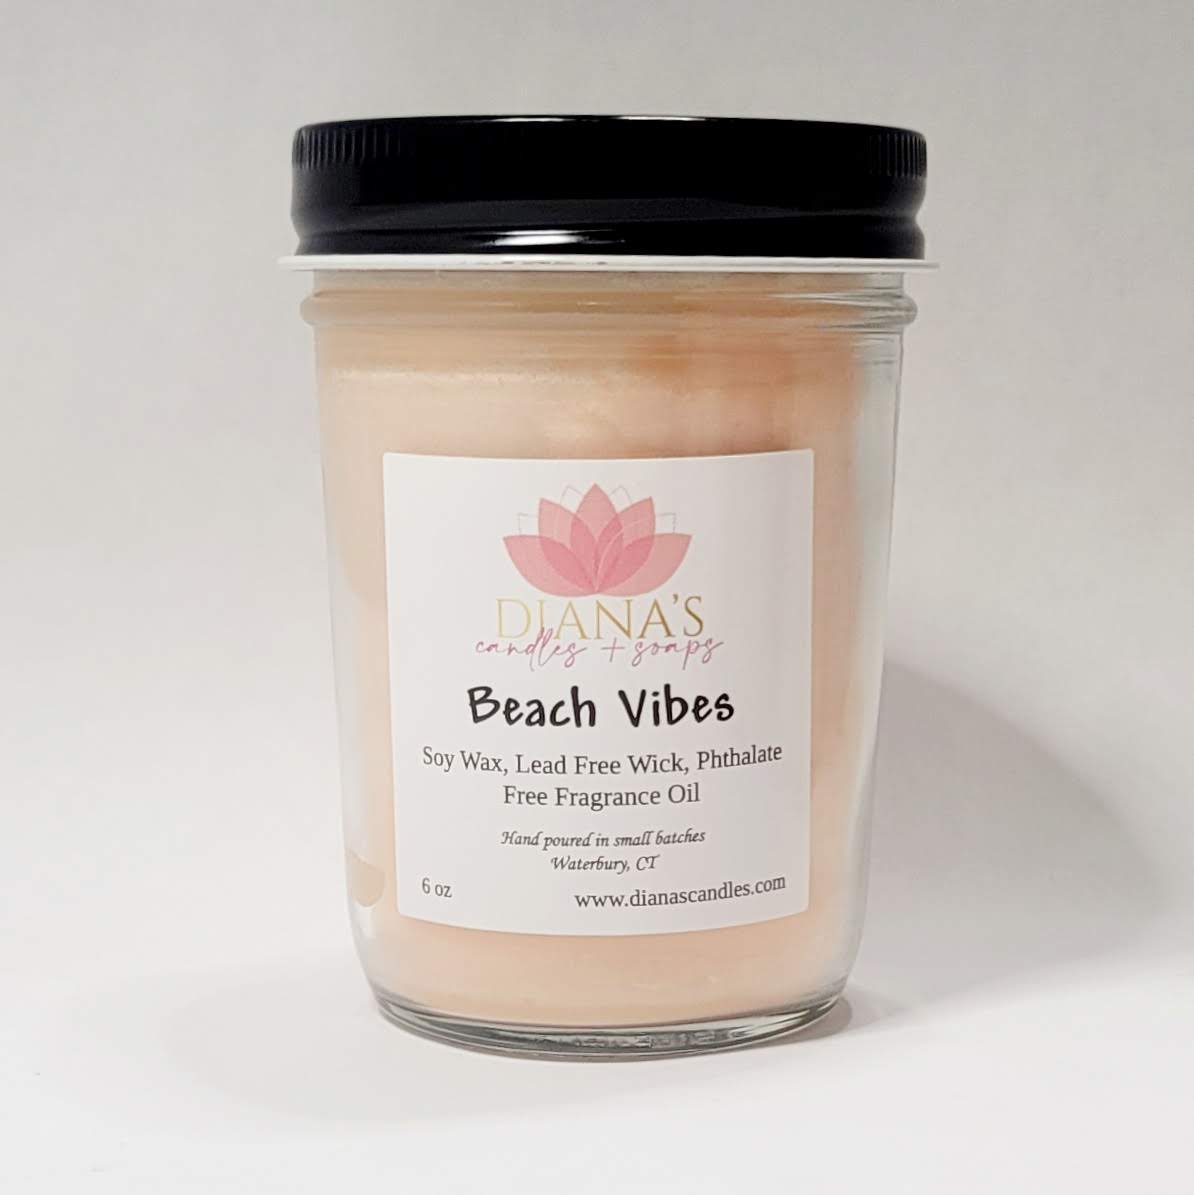 Candle Lovers' Deal Diana's Candles and Soaps 